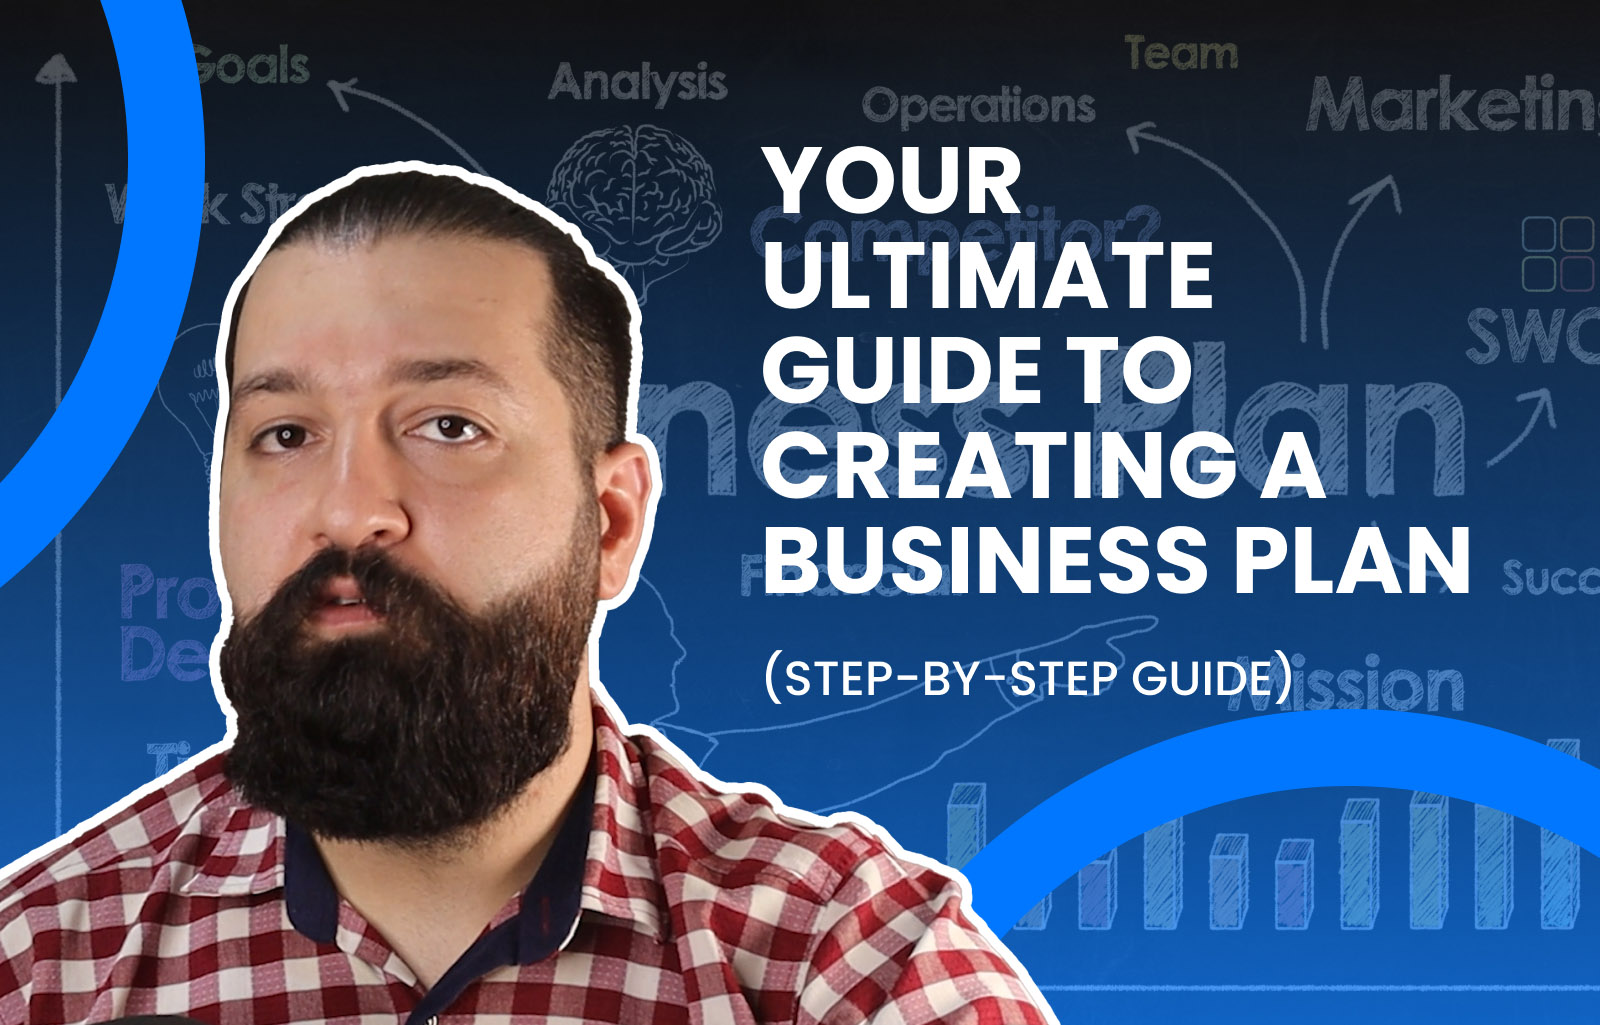 Your Ultimate Guide to Creating a Business Plan (Step-by-Step Guide)